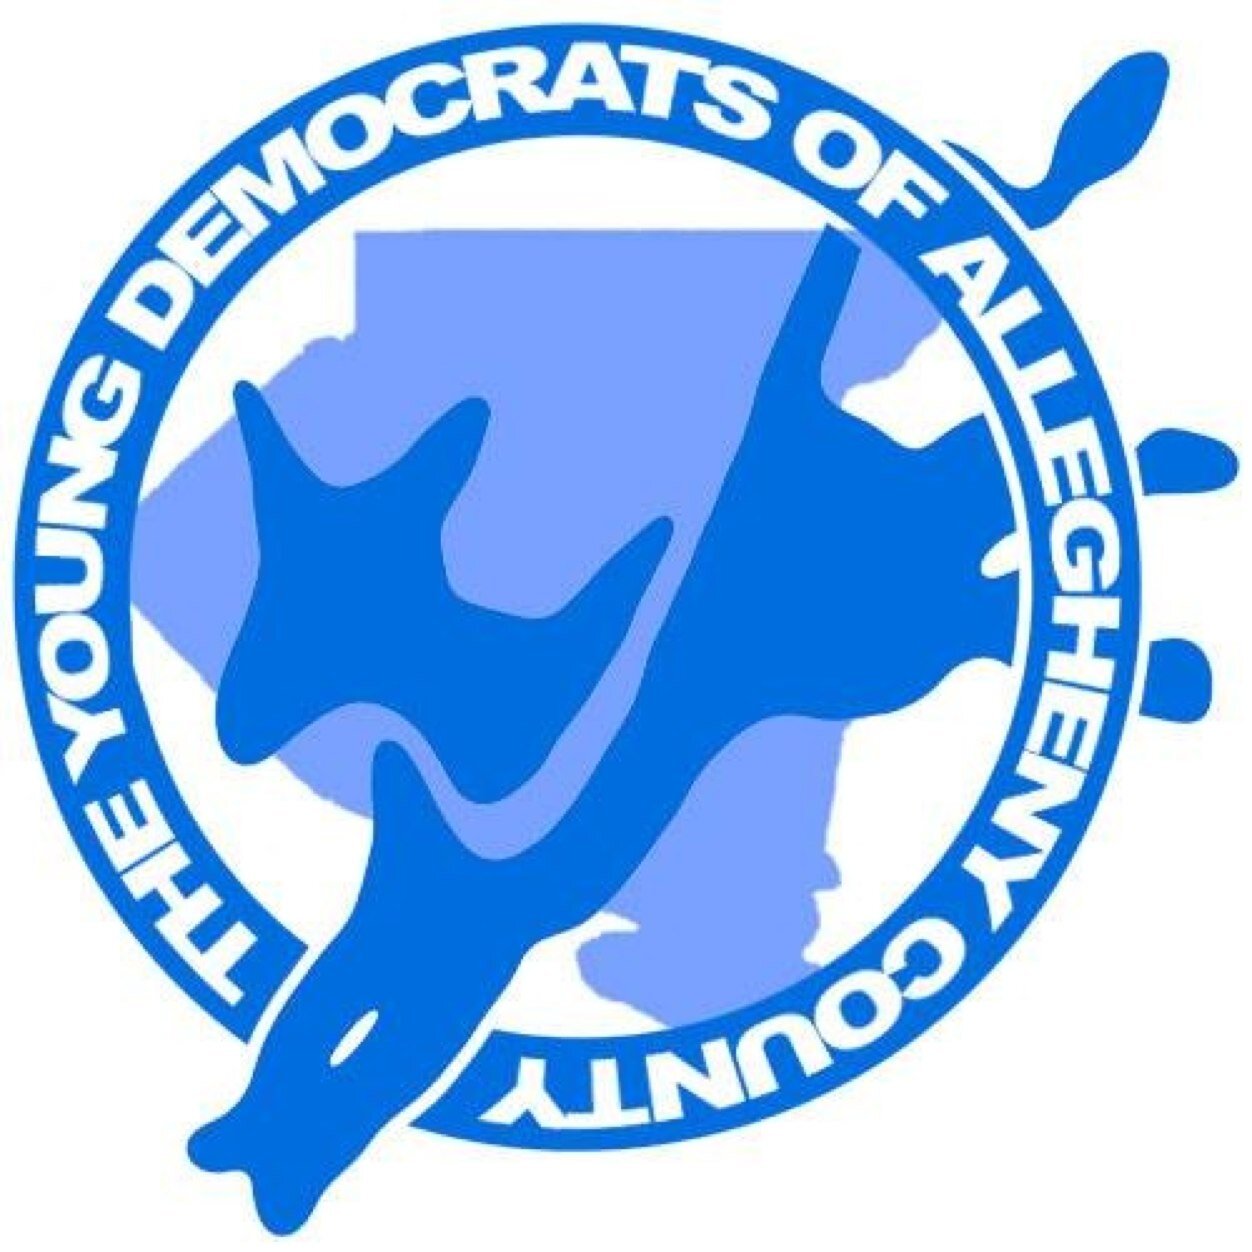 YDAC - Young Democrats of Allegheny County